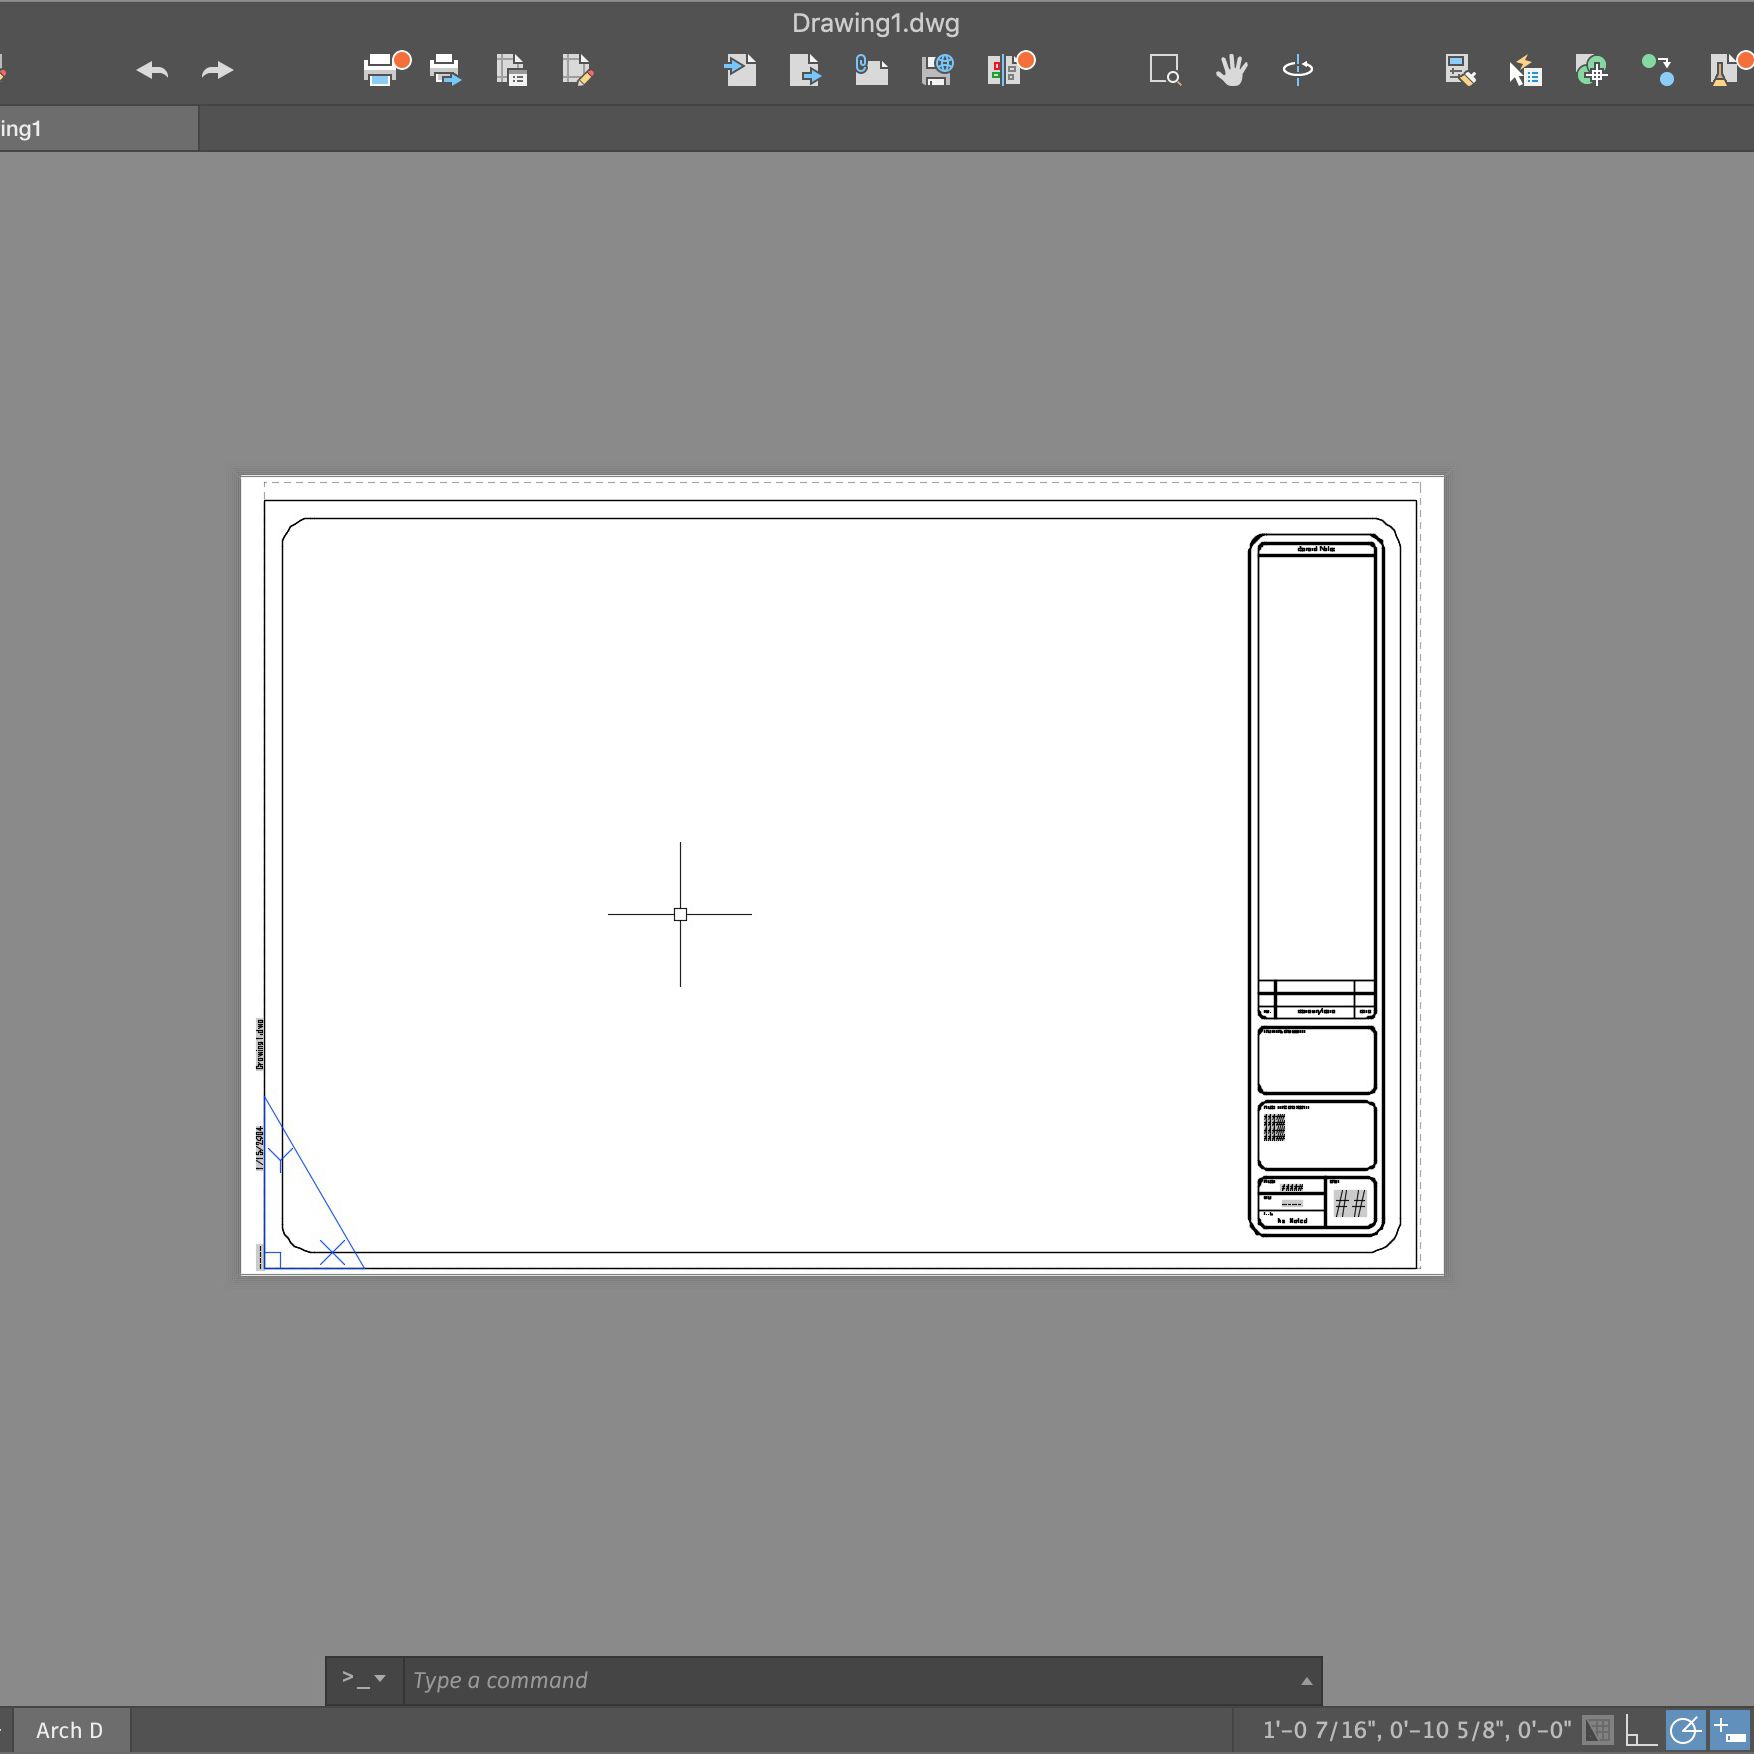 free cad drawing software for a mac